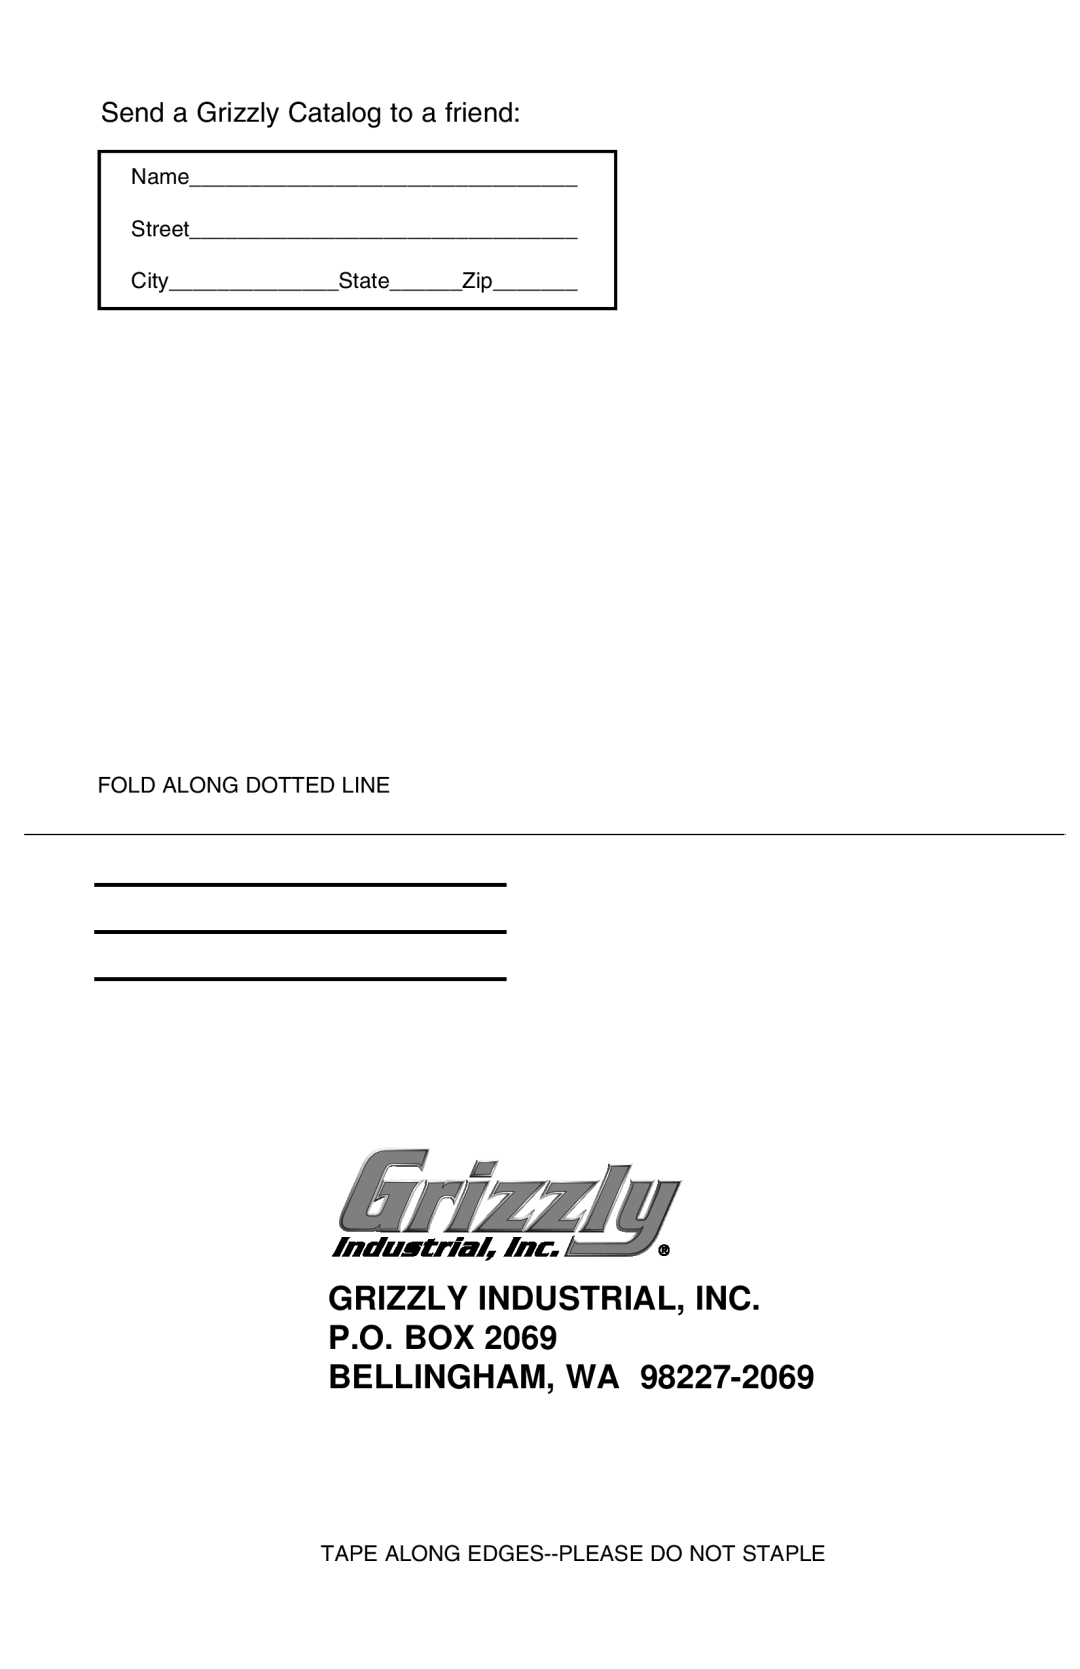 Grizzly H0600 instruction manual Grizzly Industrial, Inc P.O. Box Bellingham, Wa, Send a Grizzly Catalog to a friend 